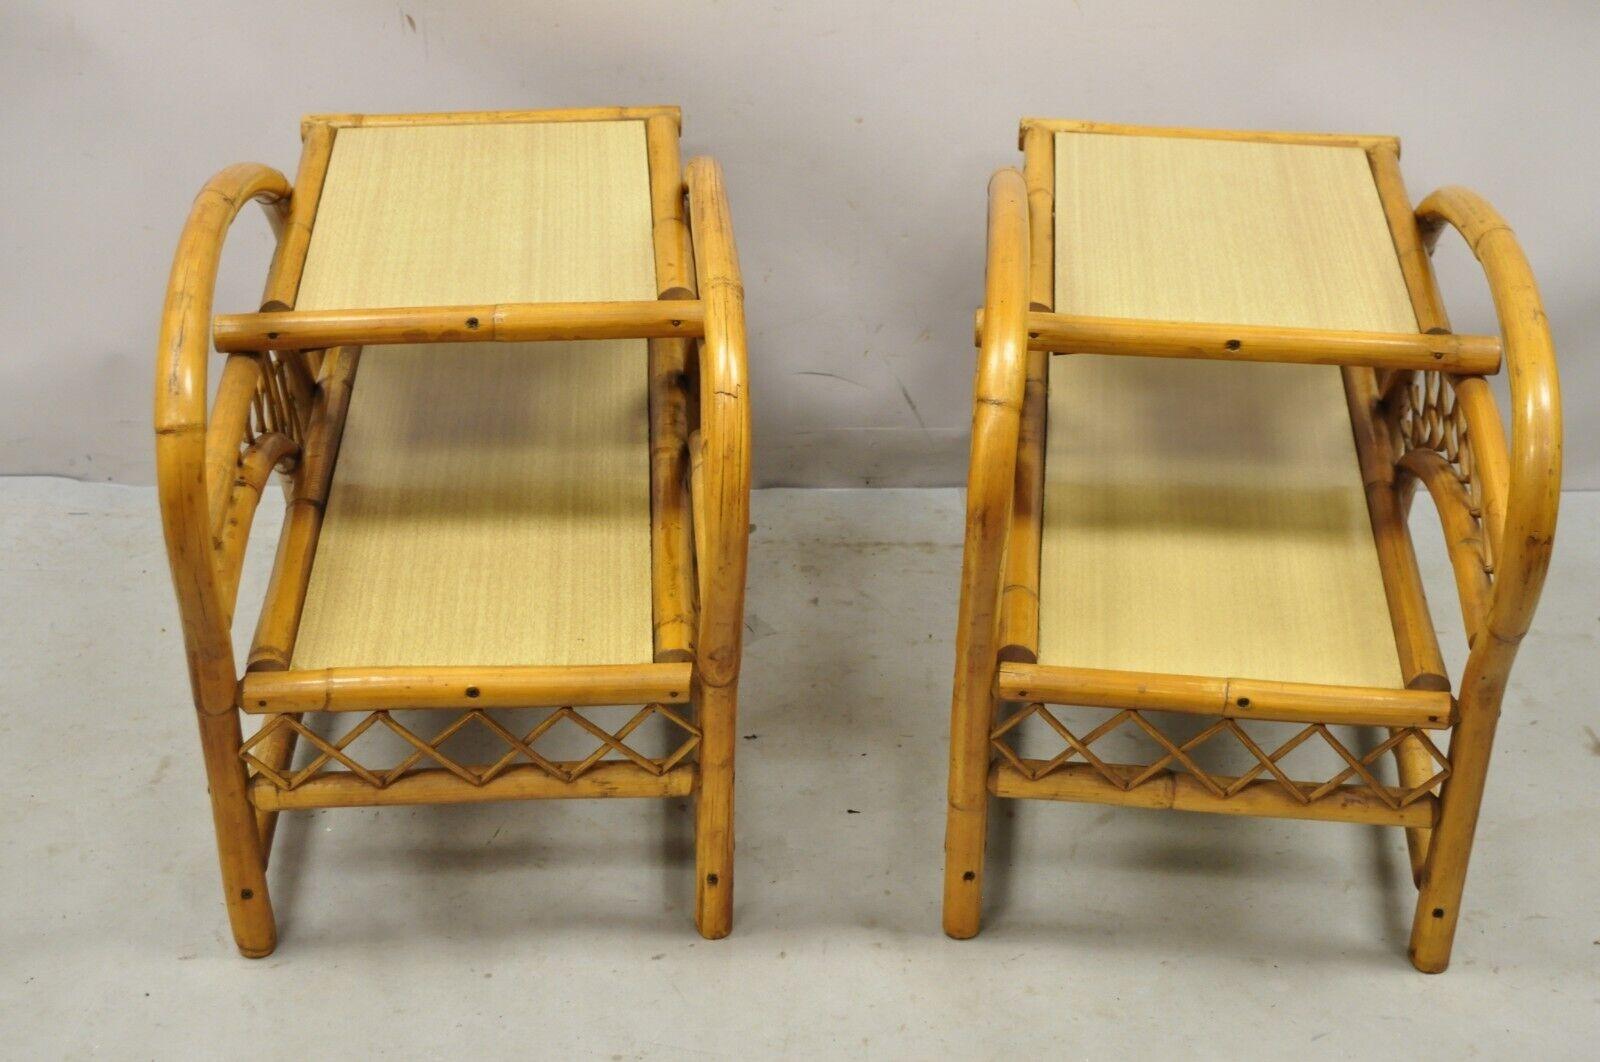 Vintage Tiki Rattan Bentwood Bamboo 2 Tier Sculptural End Tables - a Pair In Good Condition For Sale In Philadelphia, PA